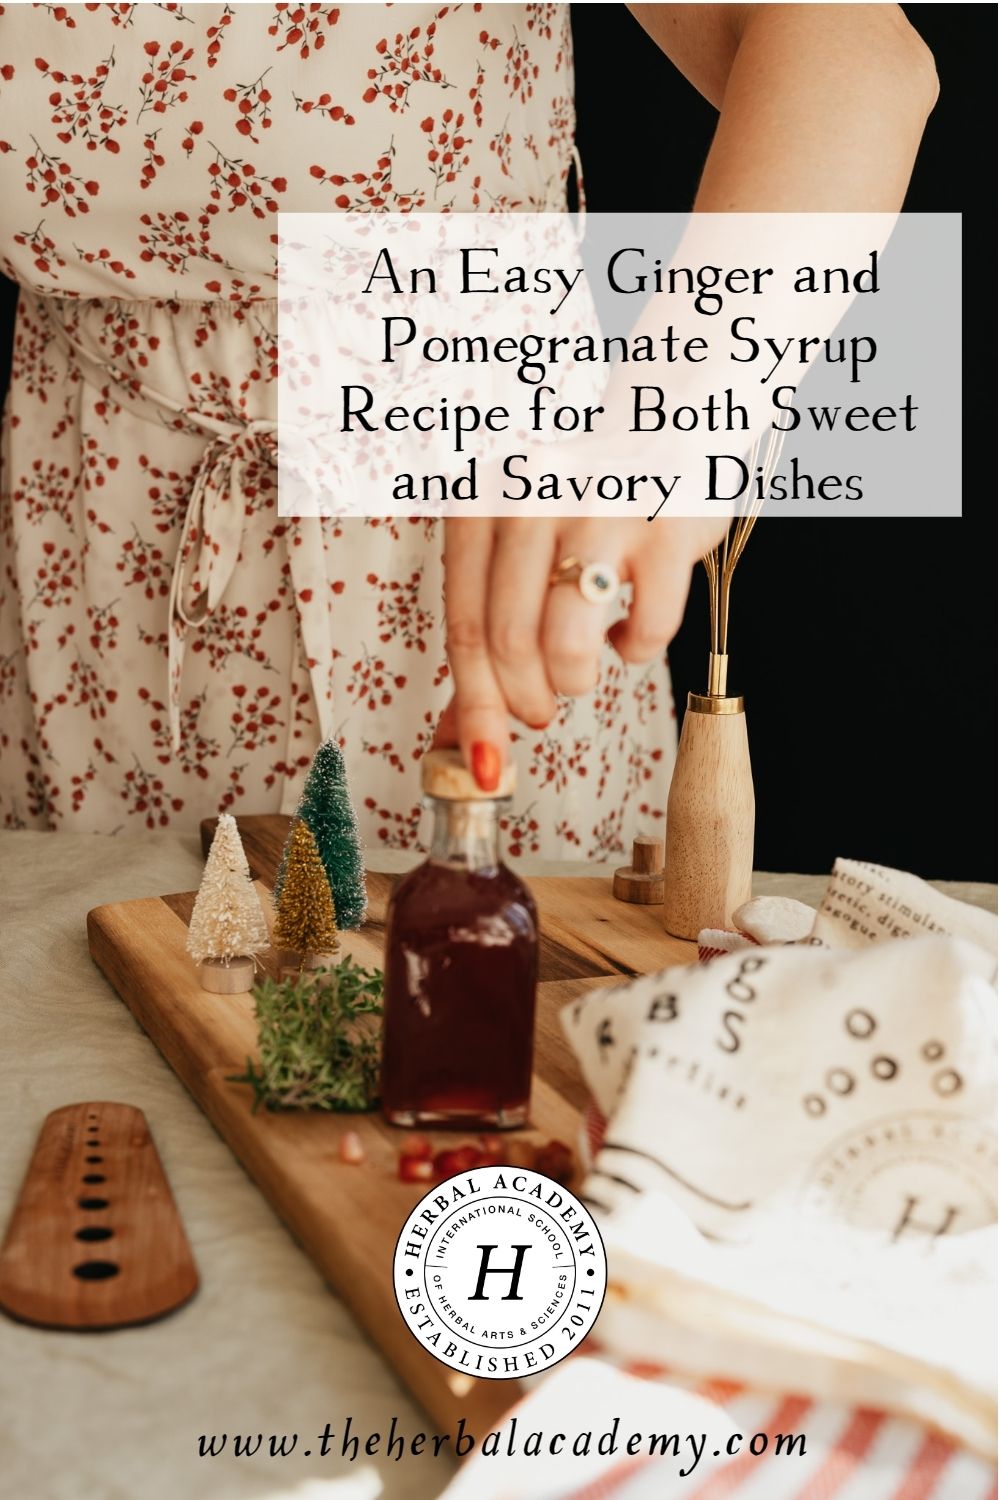 An Easy Ginger and Pomegranate Syrup Recipe for Both Sweet and Savory Dishes | Herbal Academy | We are sharing a ginger and pomegranate syrup recipe with added fresh herbs that will make sweet and savory dishes all the more delicious!